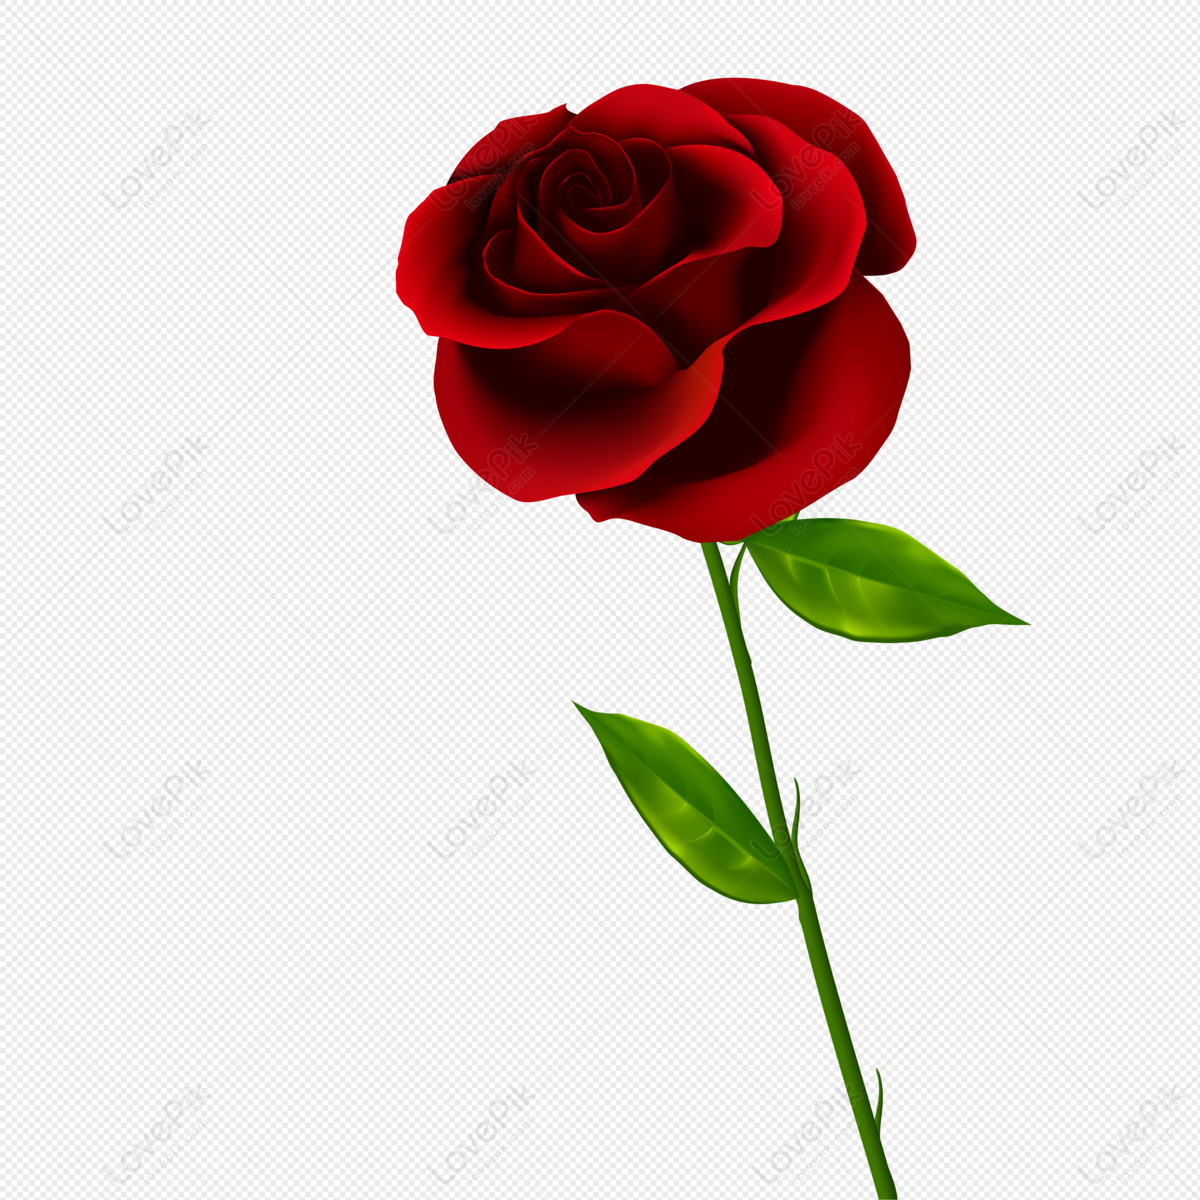 A Rose PNG Transparent Image And Clipart Image For Free Download - Lovepik  | 401115847